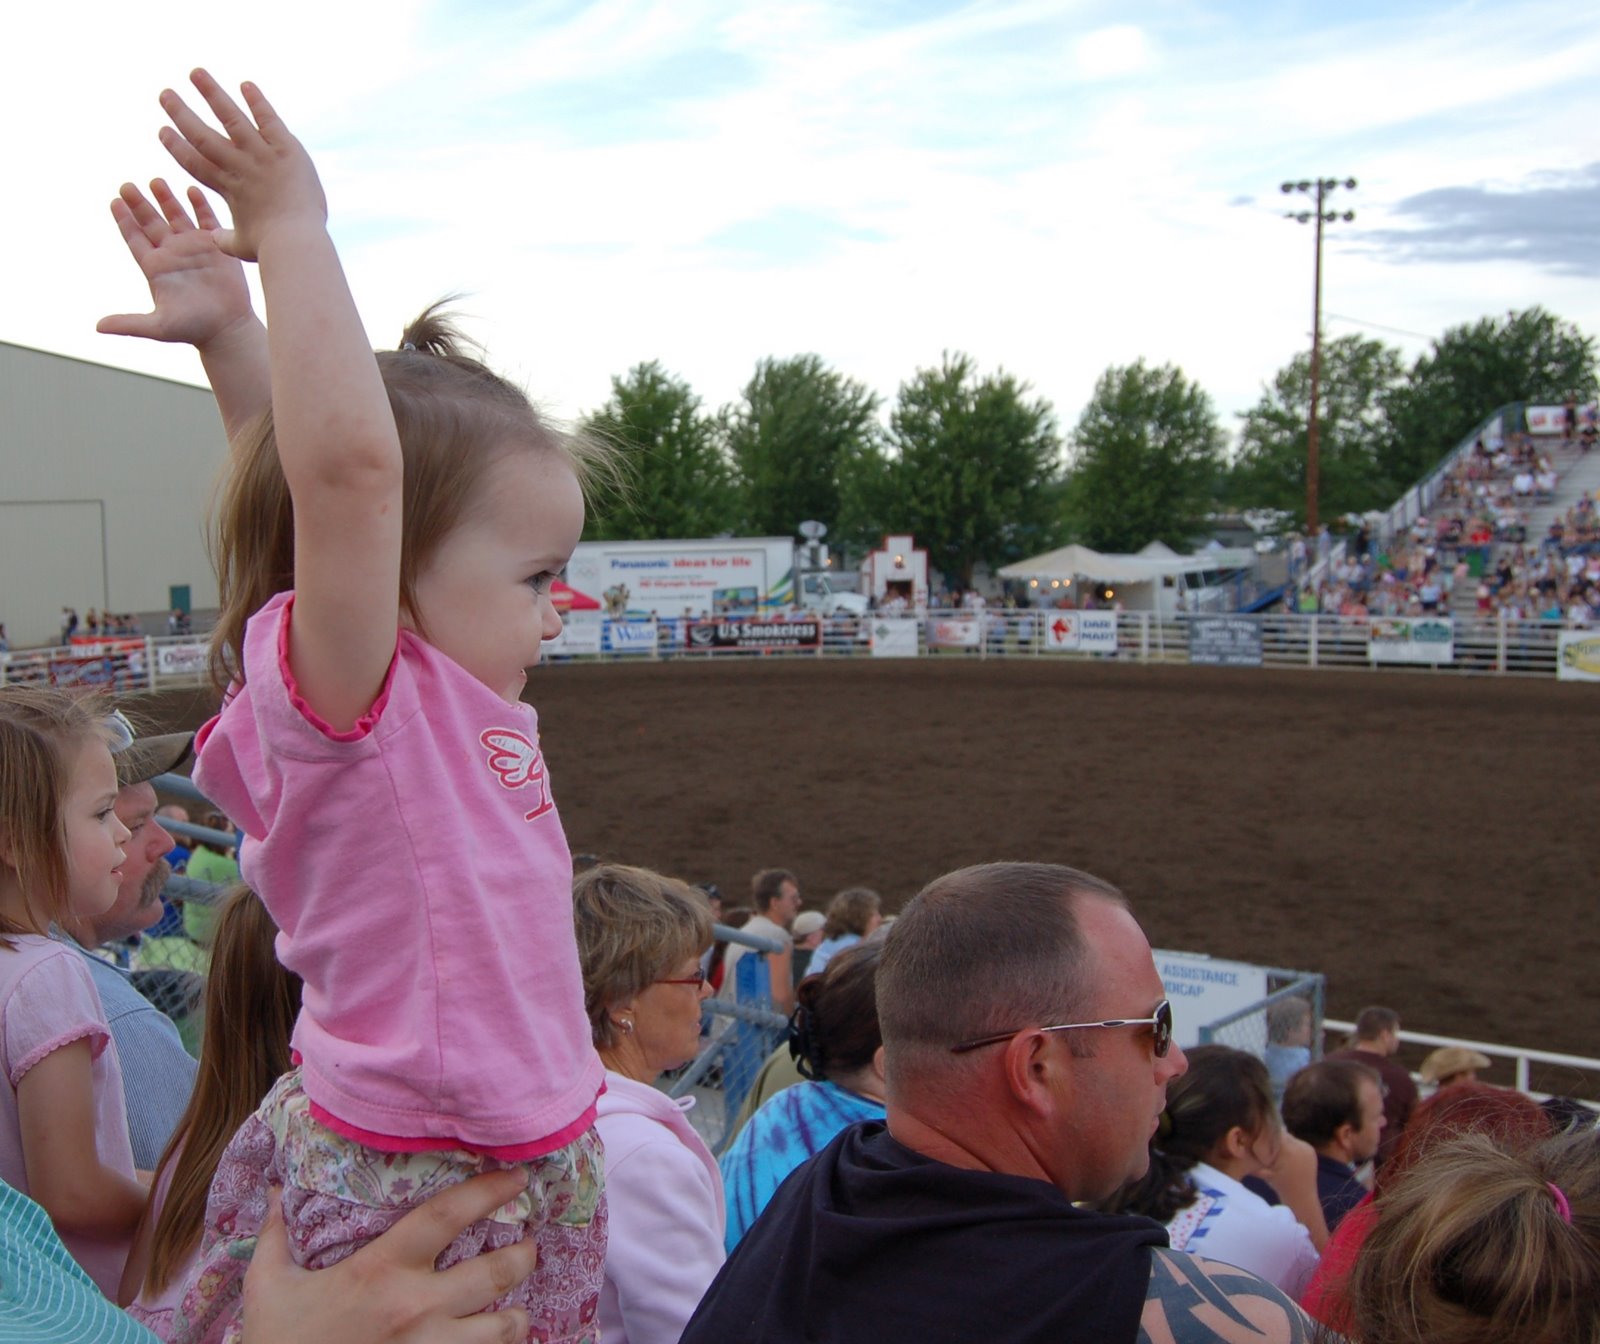 [Audrey+Excited+at+Rodeo.JPG]